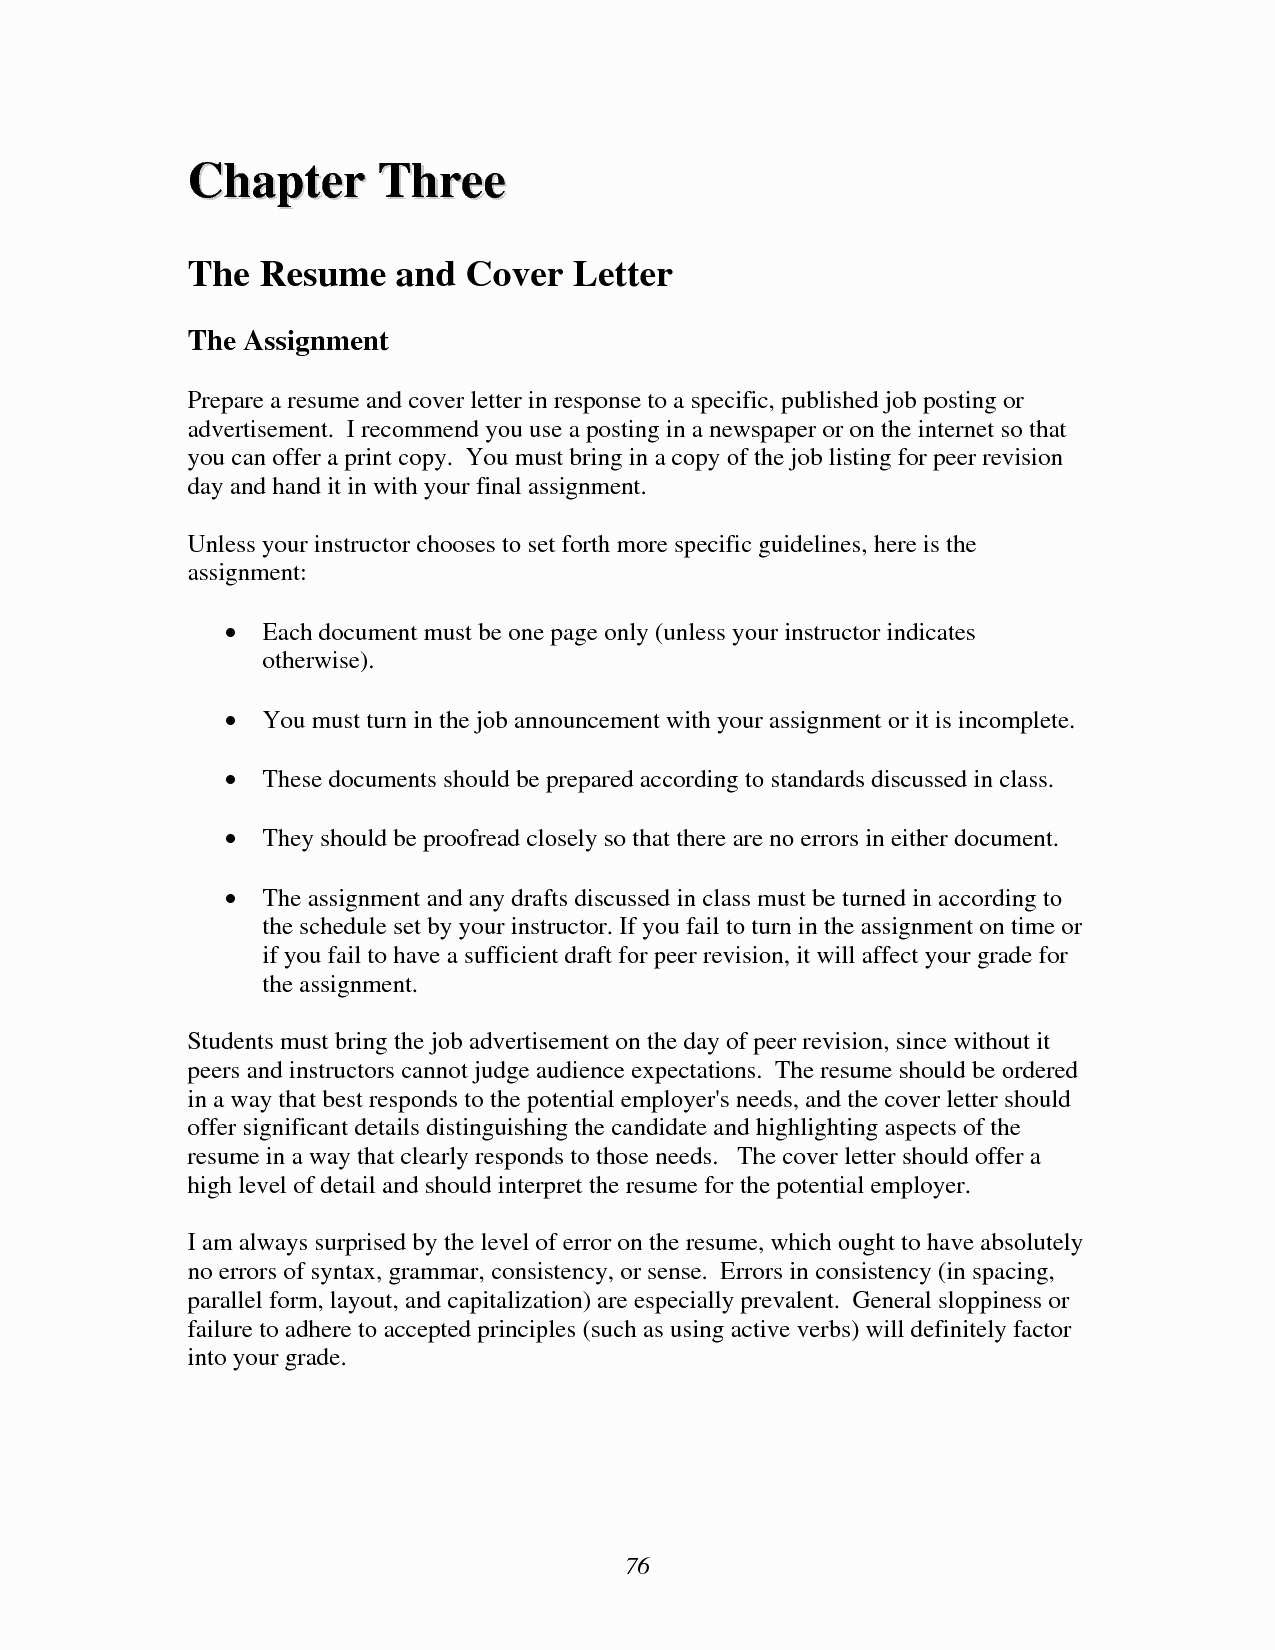 Sample Employee Offer Letter Template - Cpt Job Fer Letter Sample Valid Job Fer Letter Template Us Copy Od